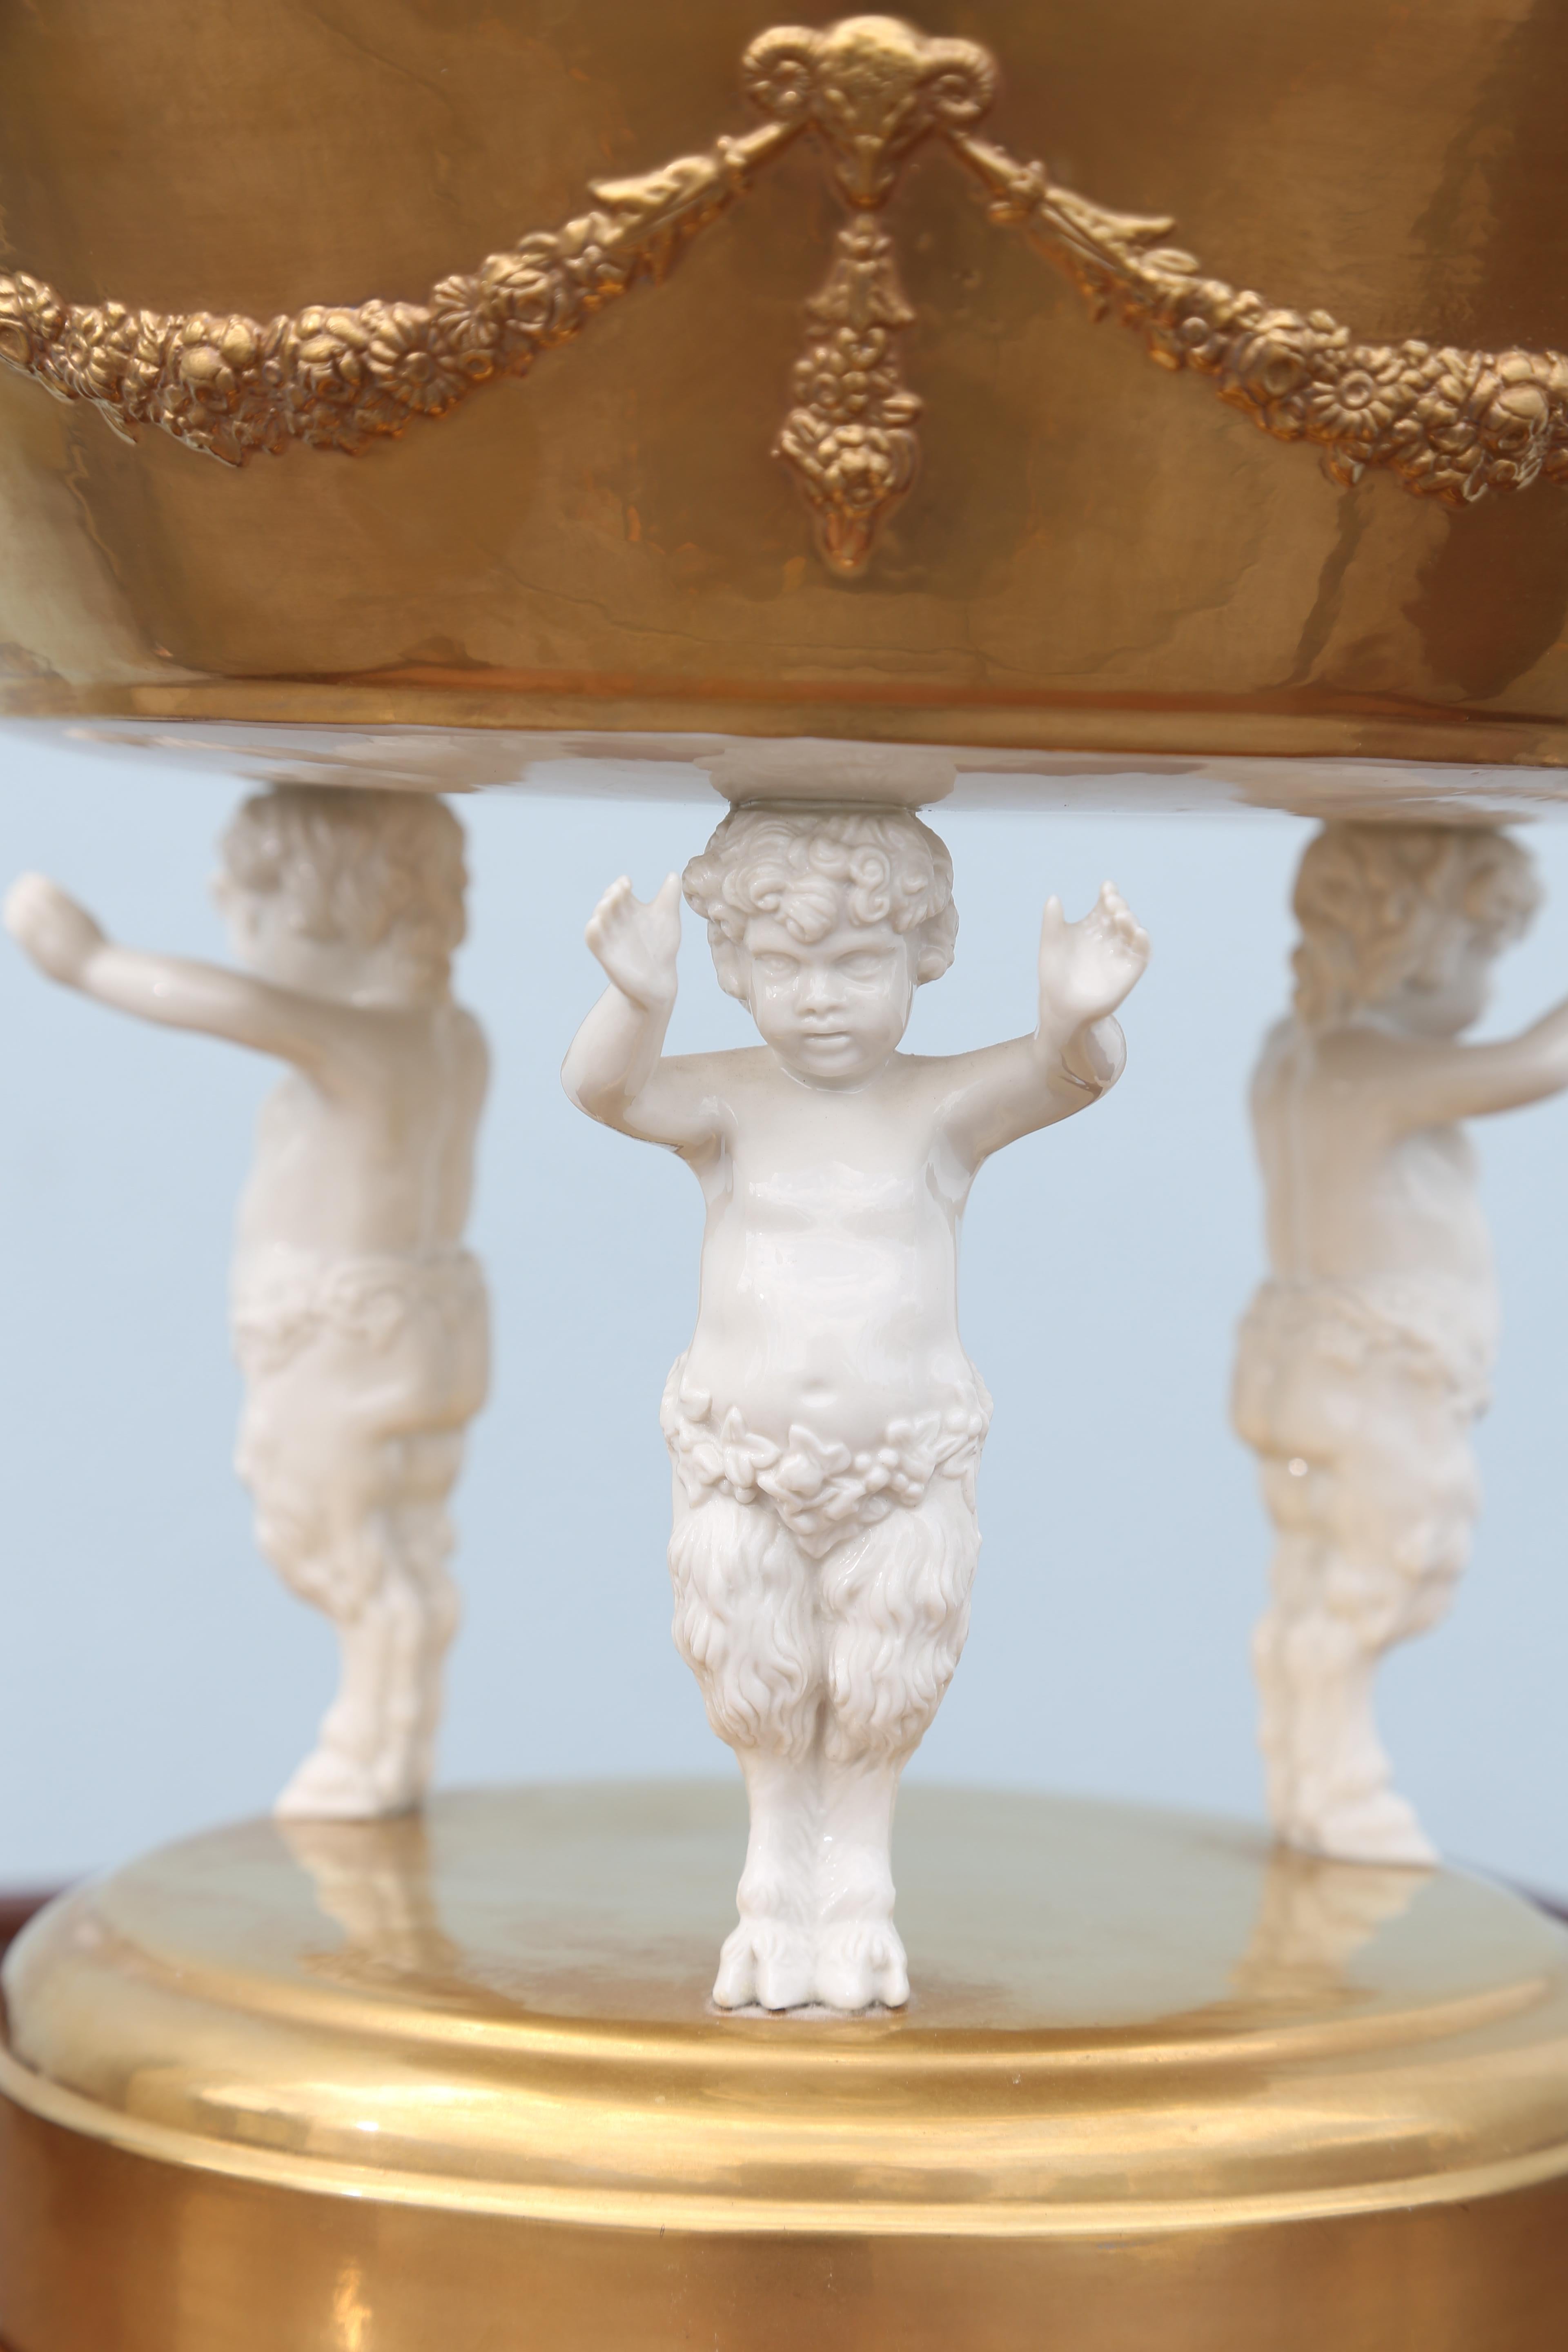 Gilded porcelain centerpiece with three mythological putti standing on round base supporting large bowl on their heads.